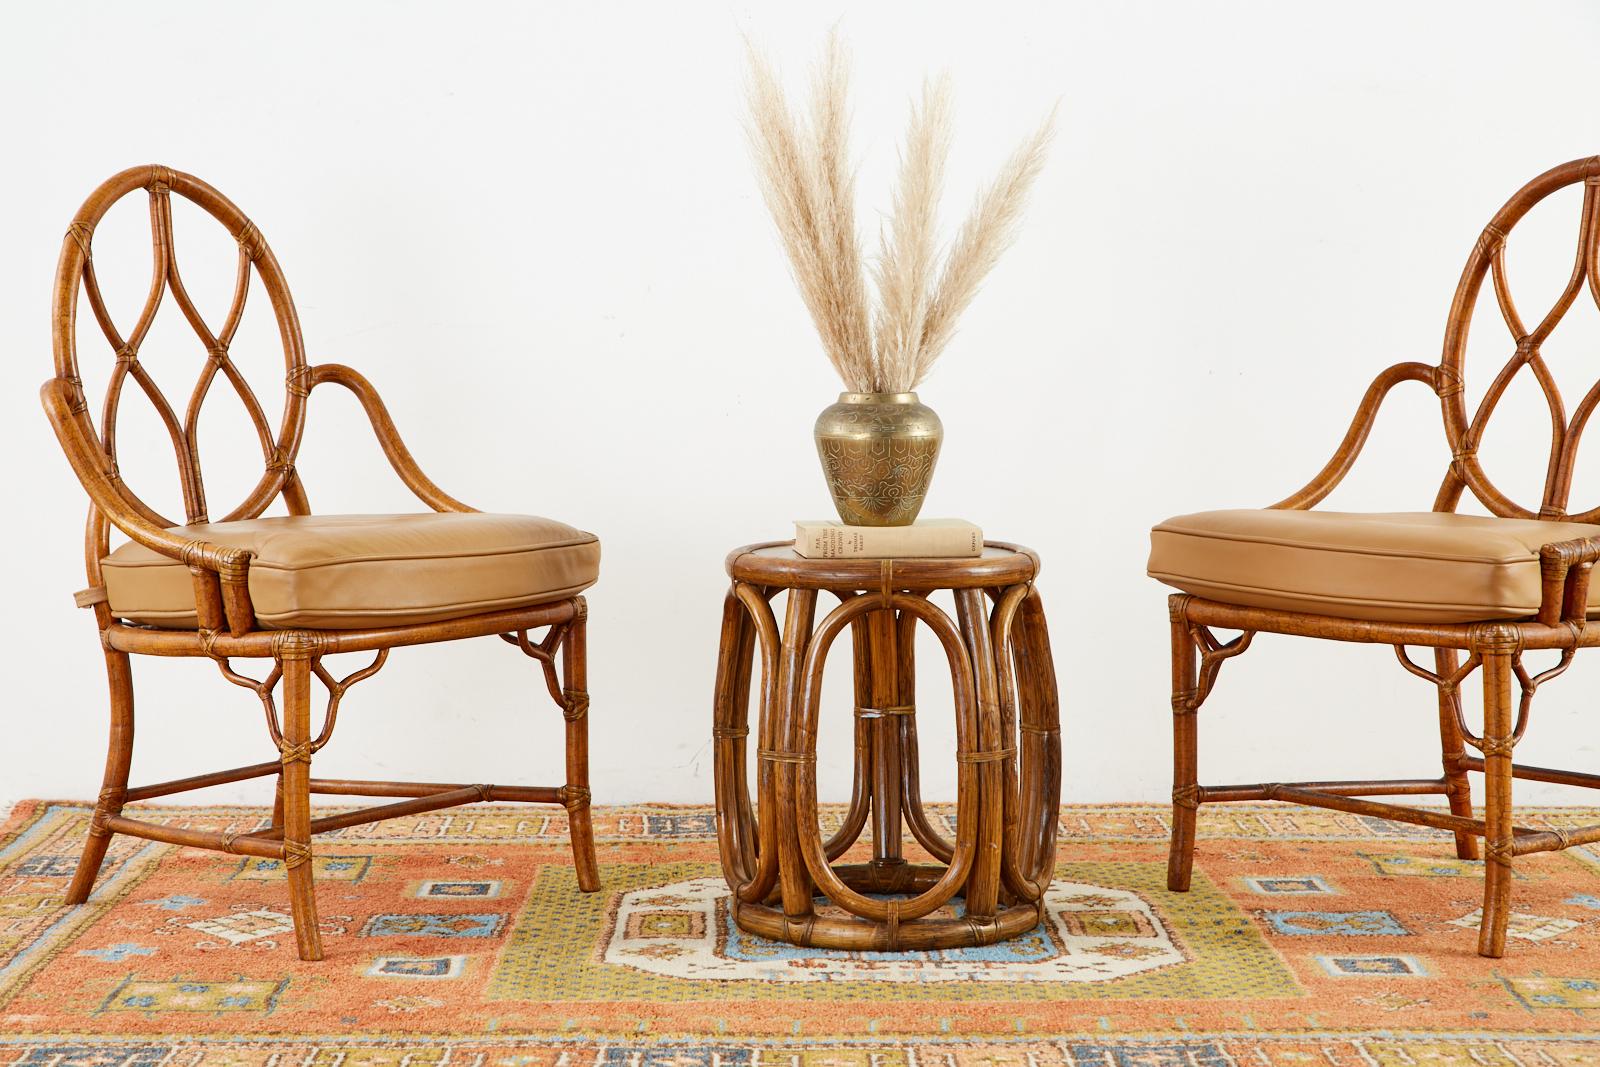 Rare pair of genuine McGuire garden stools or drinks tables having a drum form or tabouret style. Made in the California organic modern style from bent rattan poles lashed together with leather rawhide laces. Versatile little tables that can also be